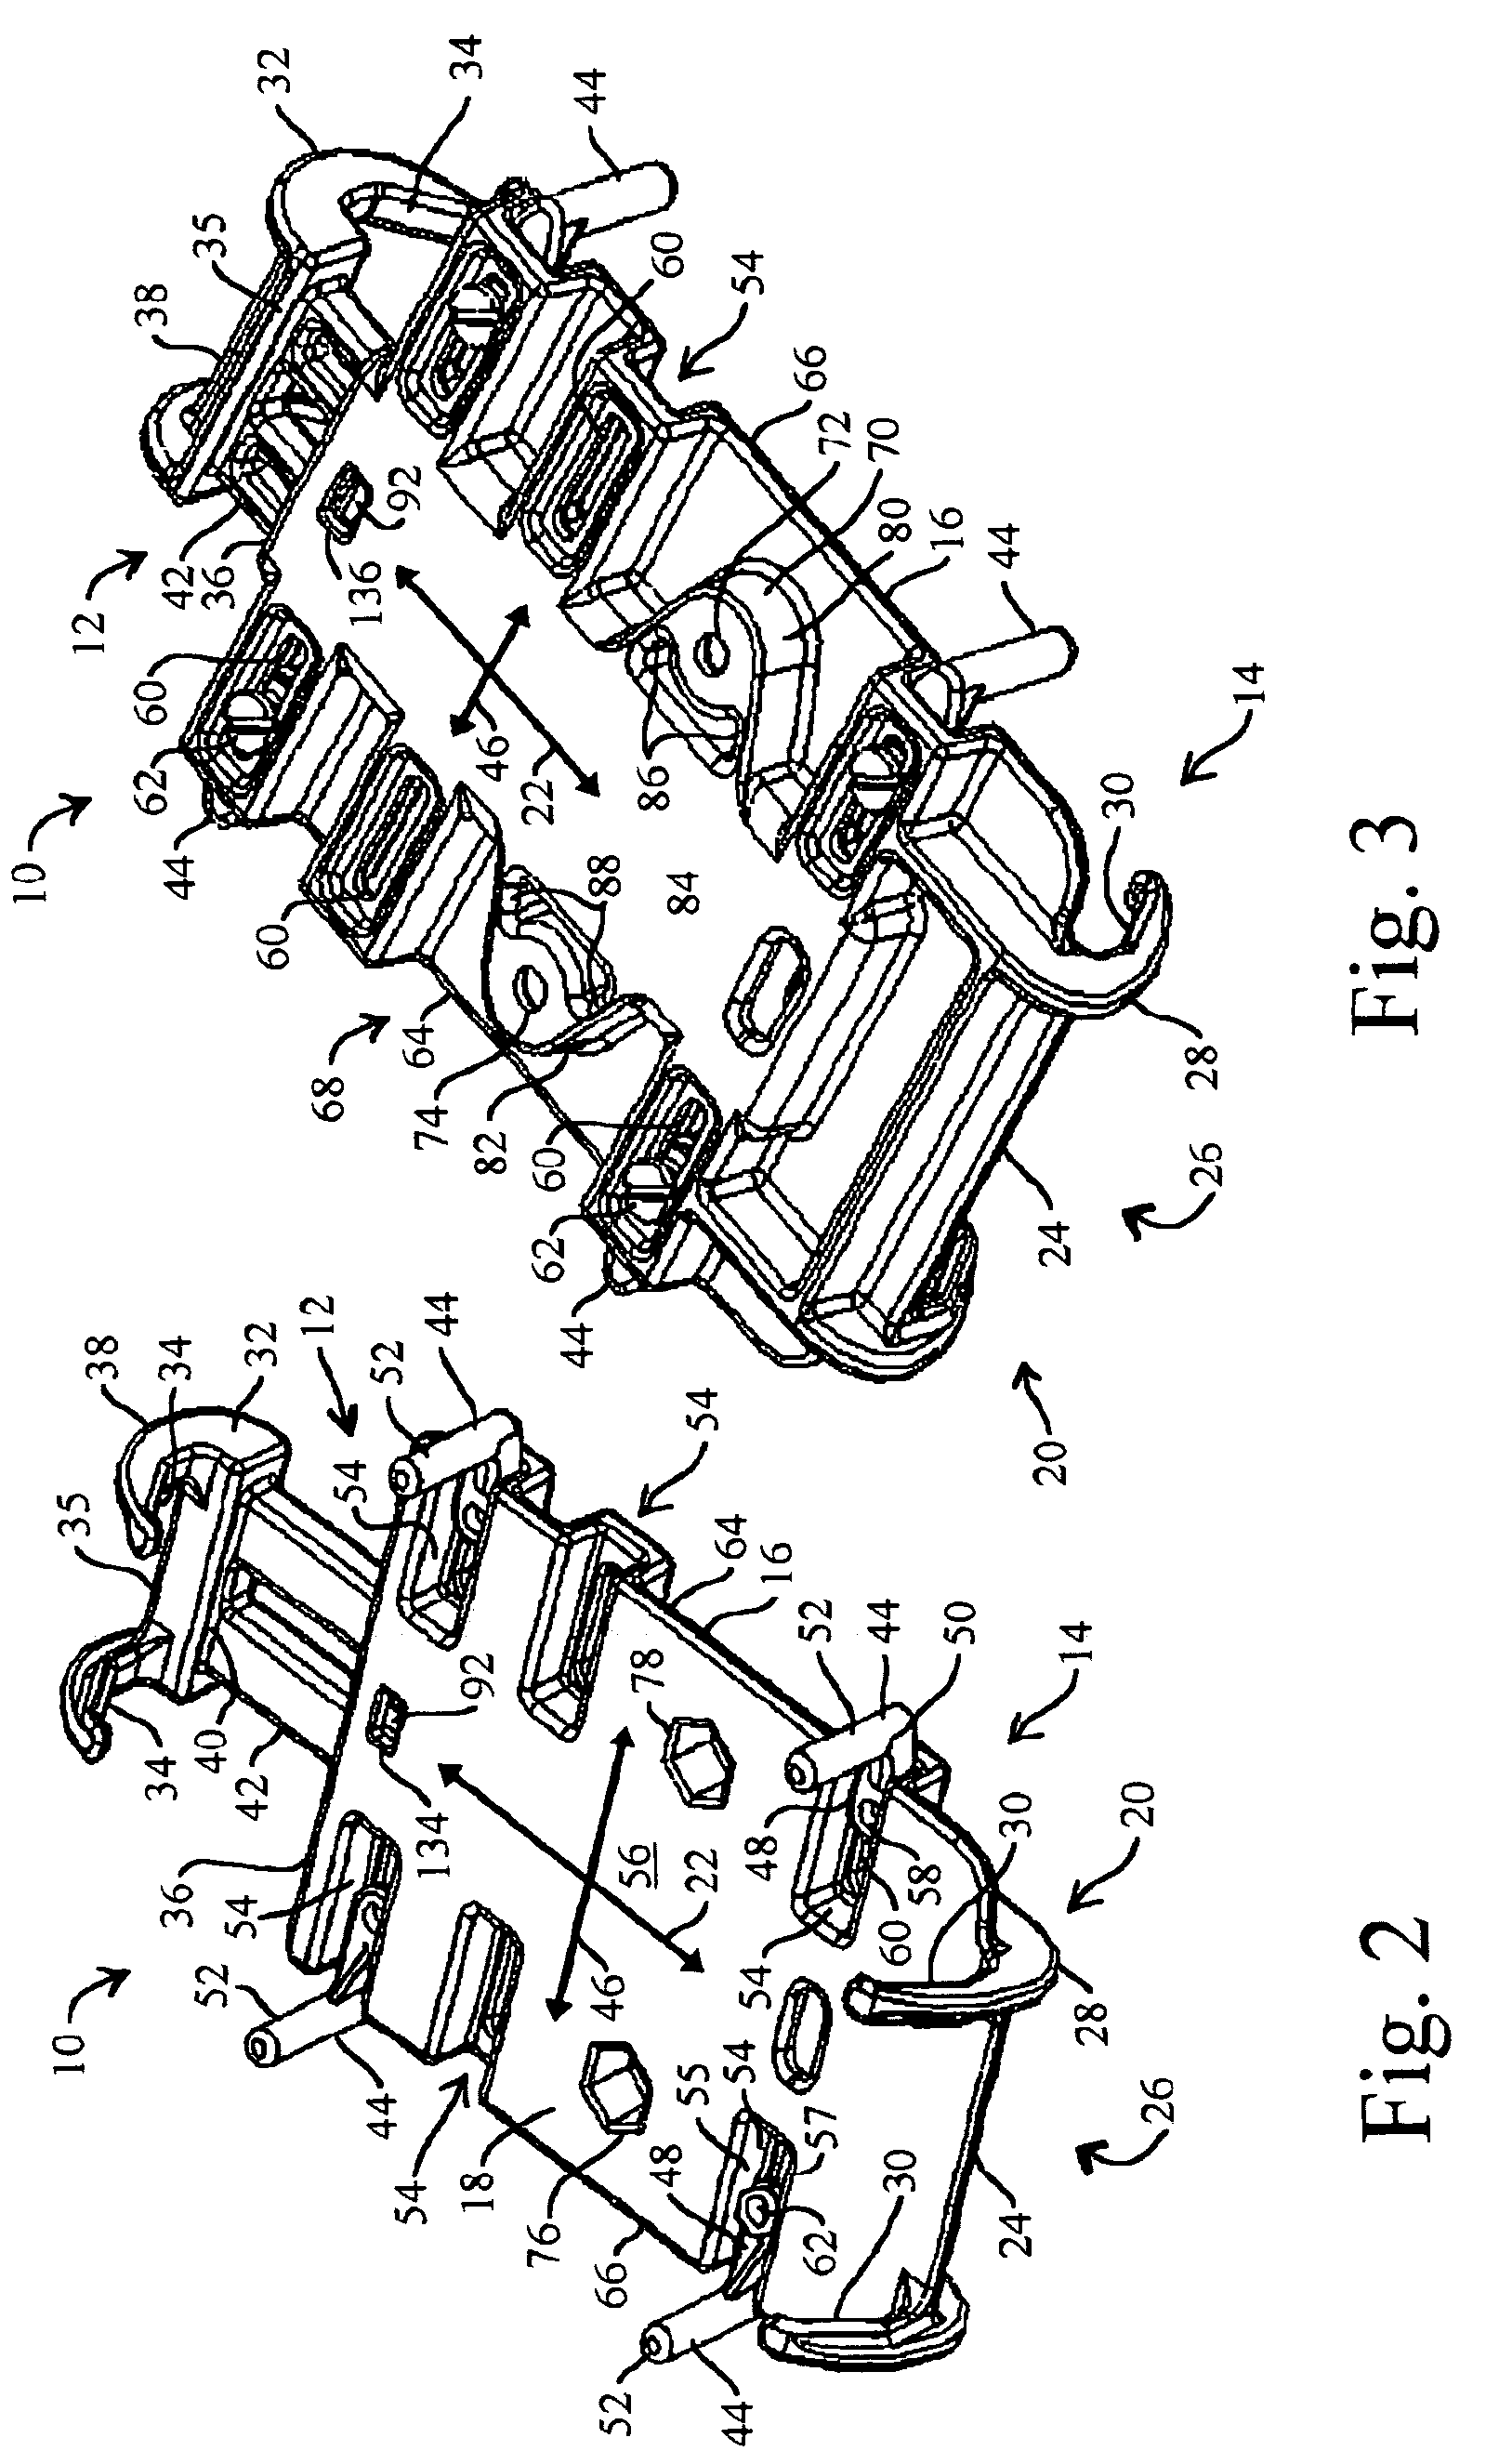 Secure universal mounting apparatus